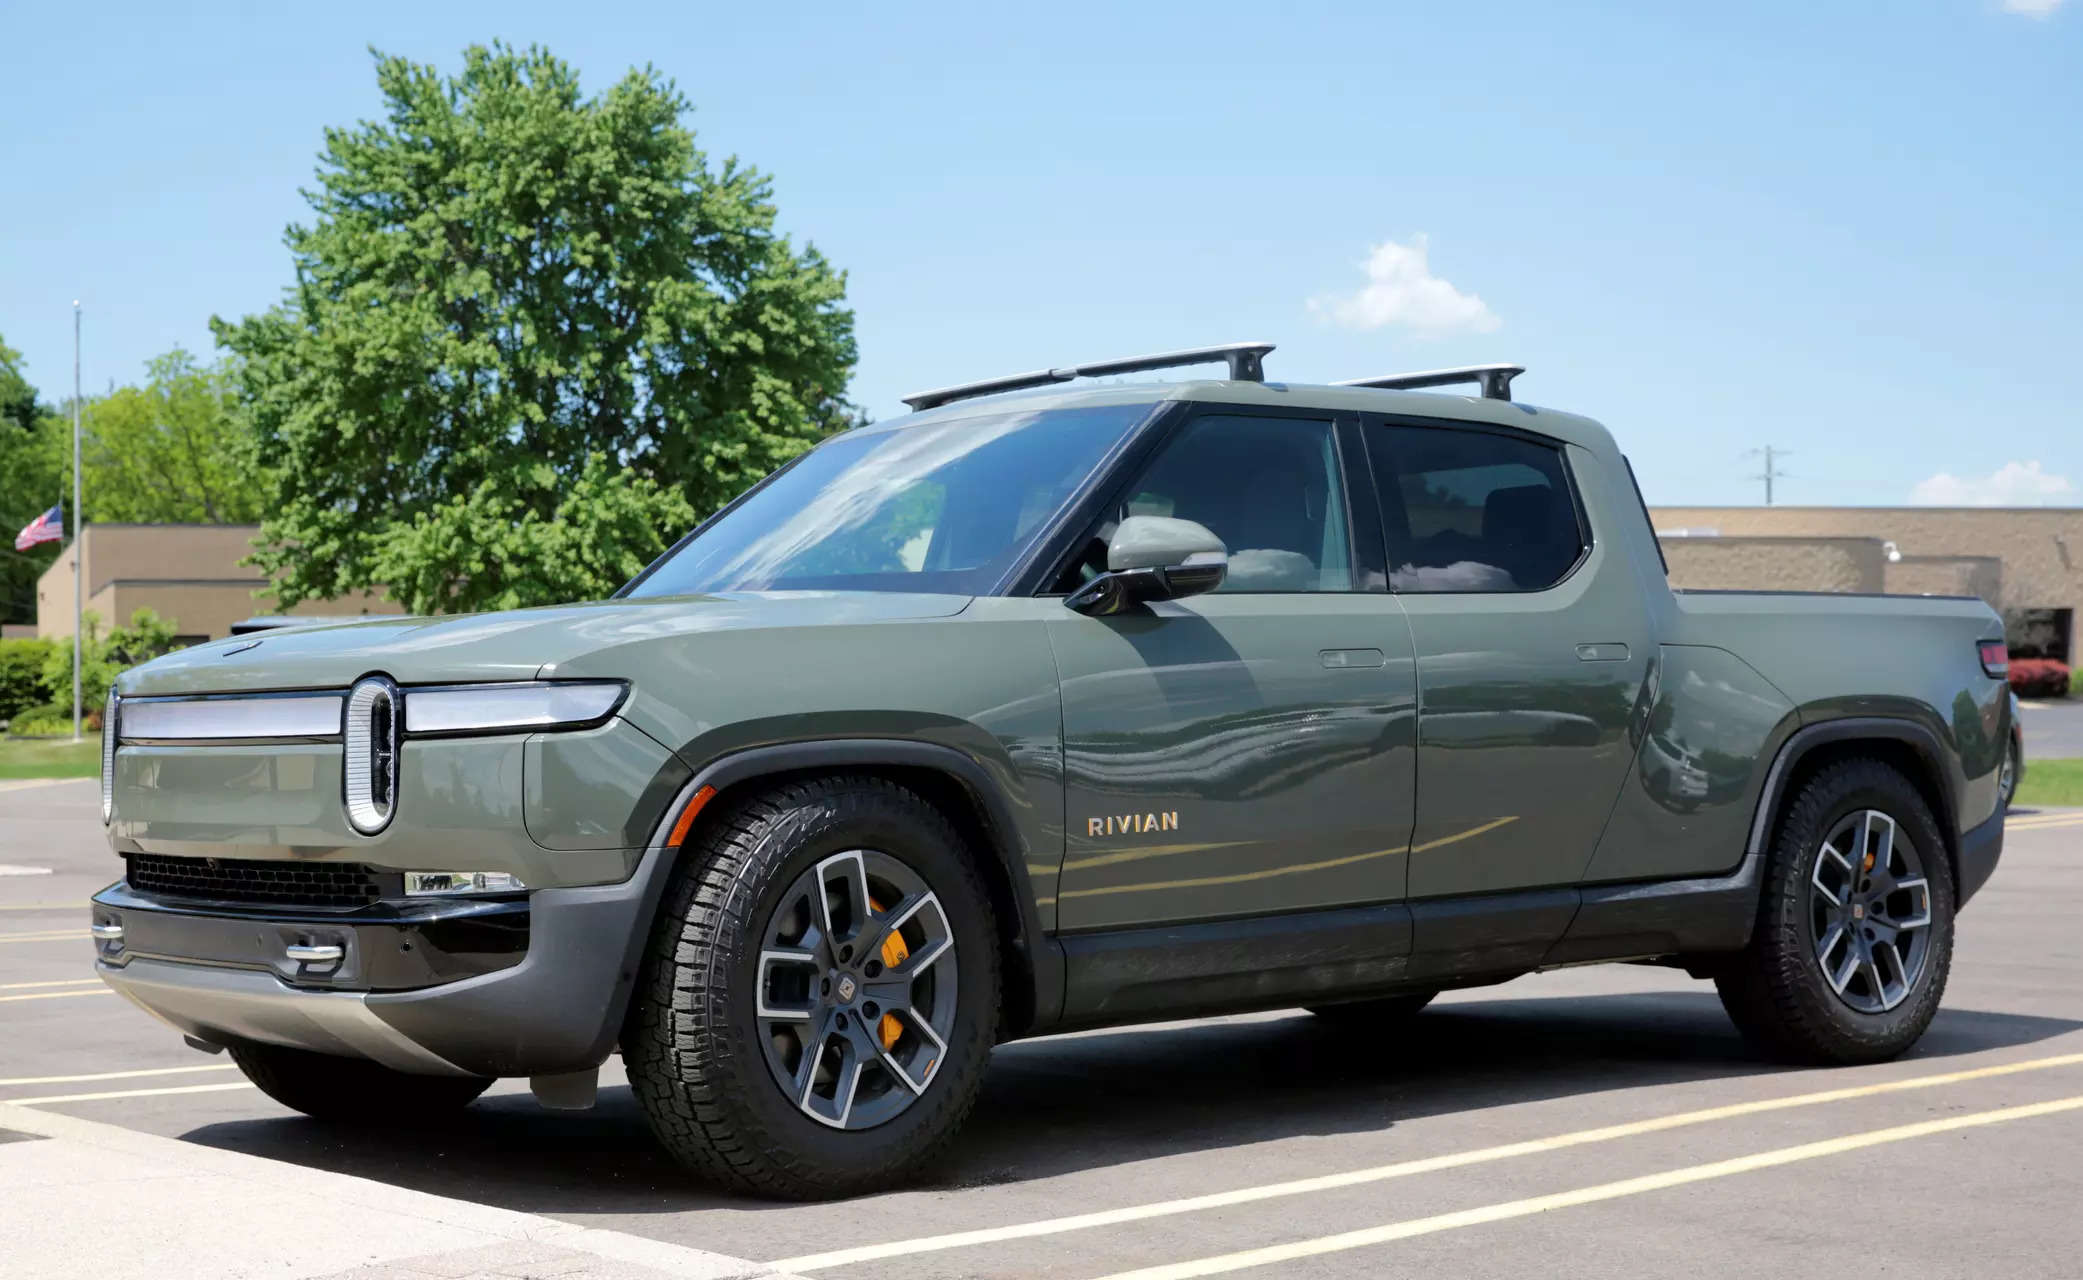 Rivian Exceeds Expectations With 23% Increase In Q3 Deliveries